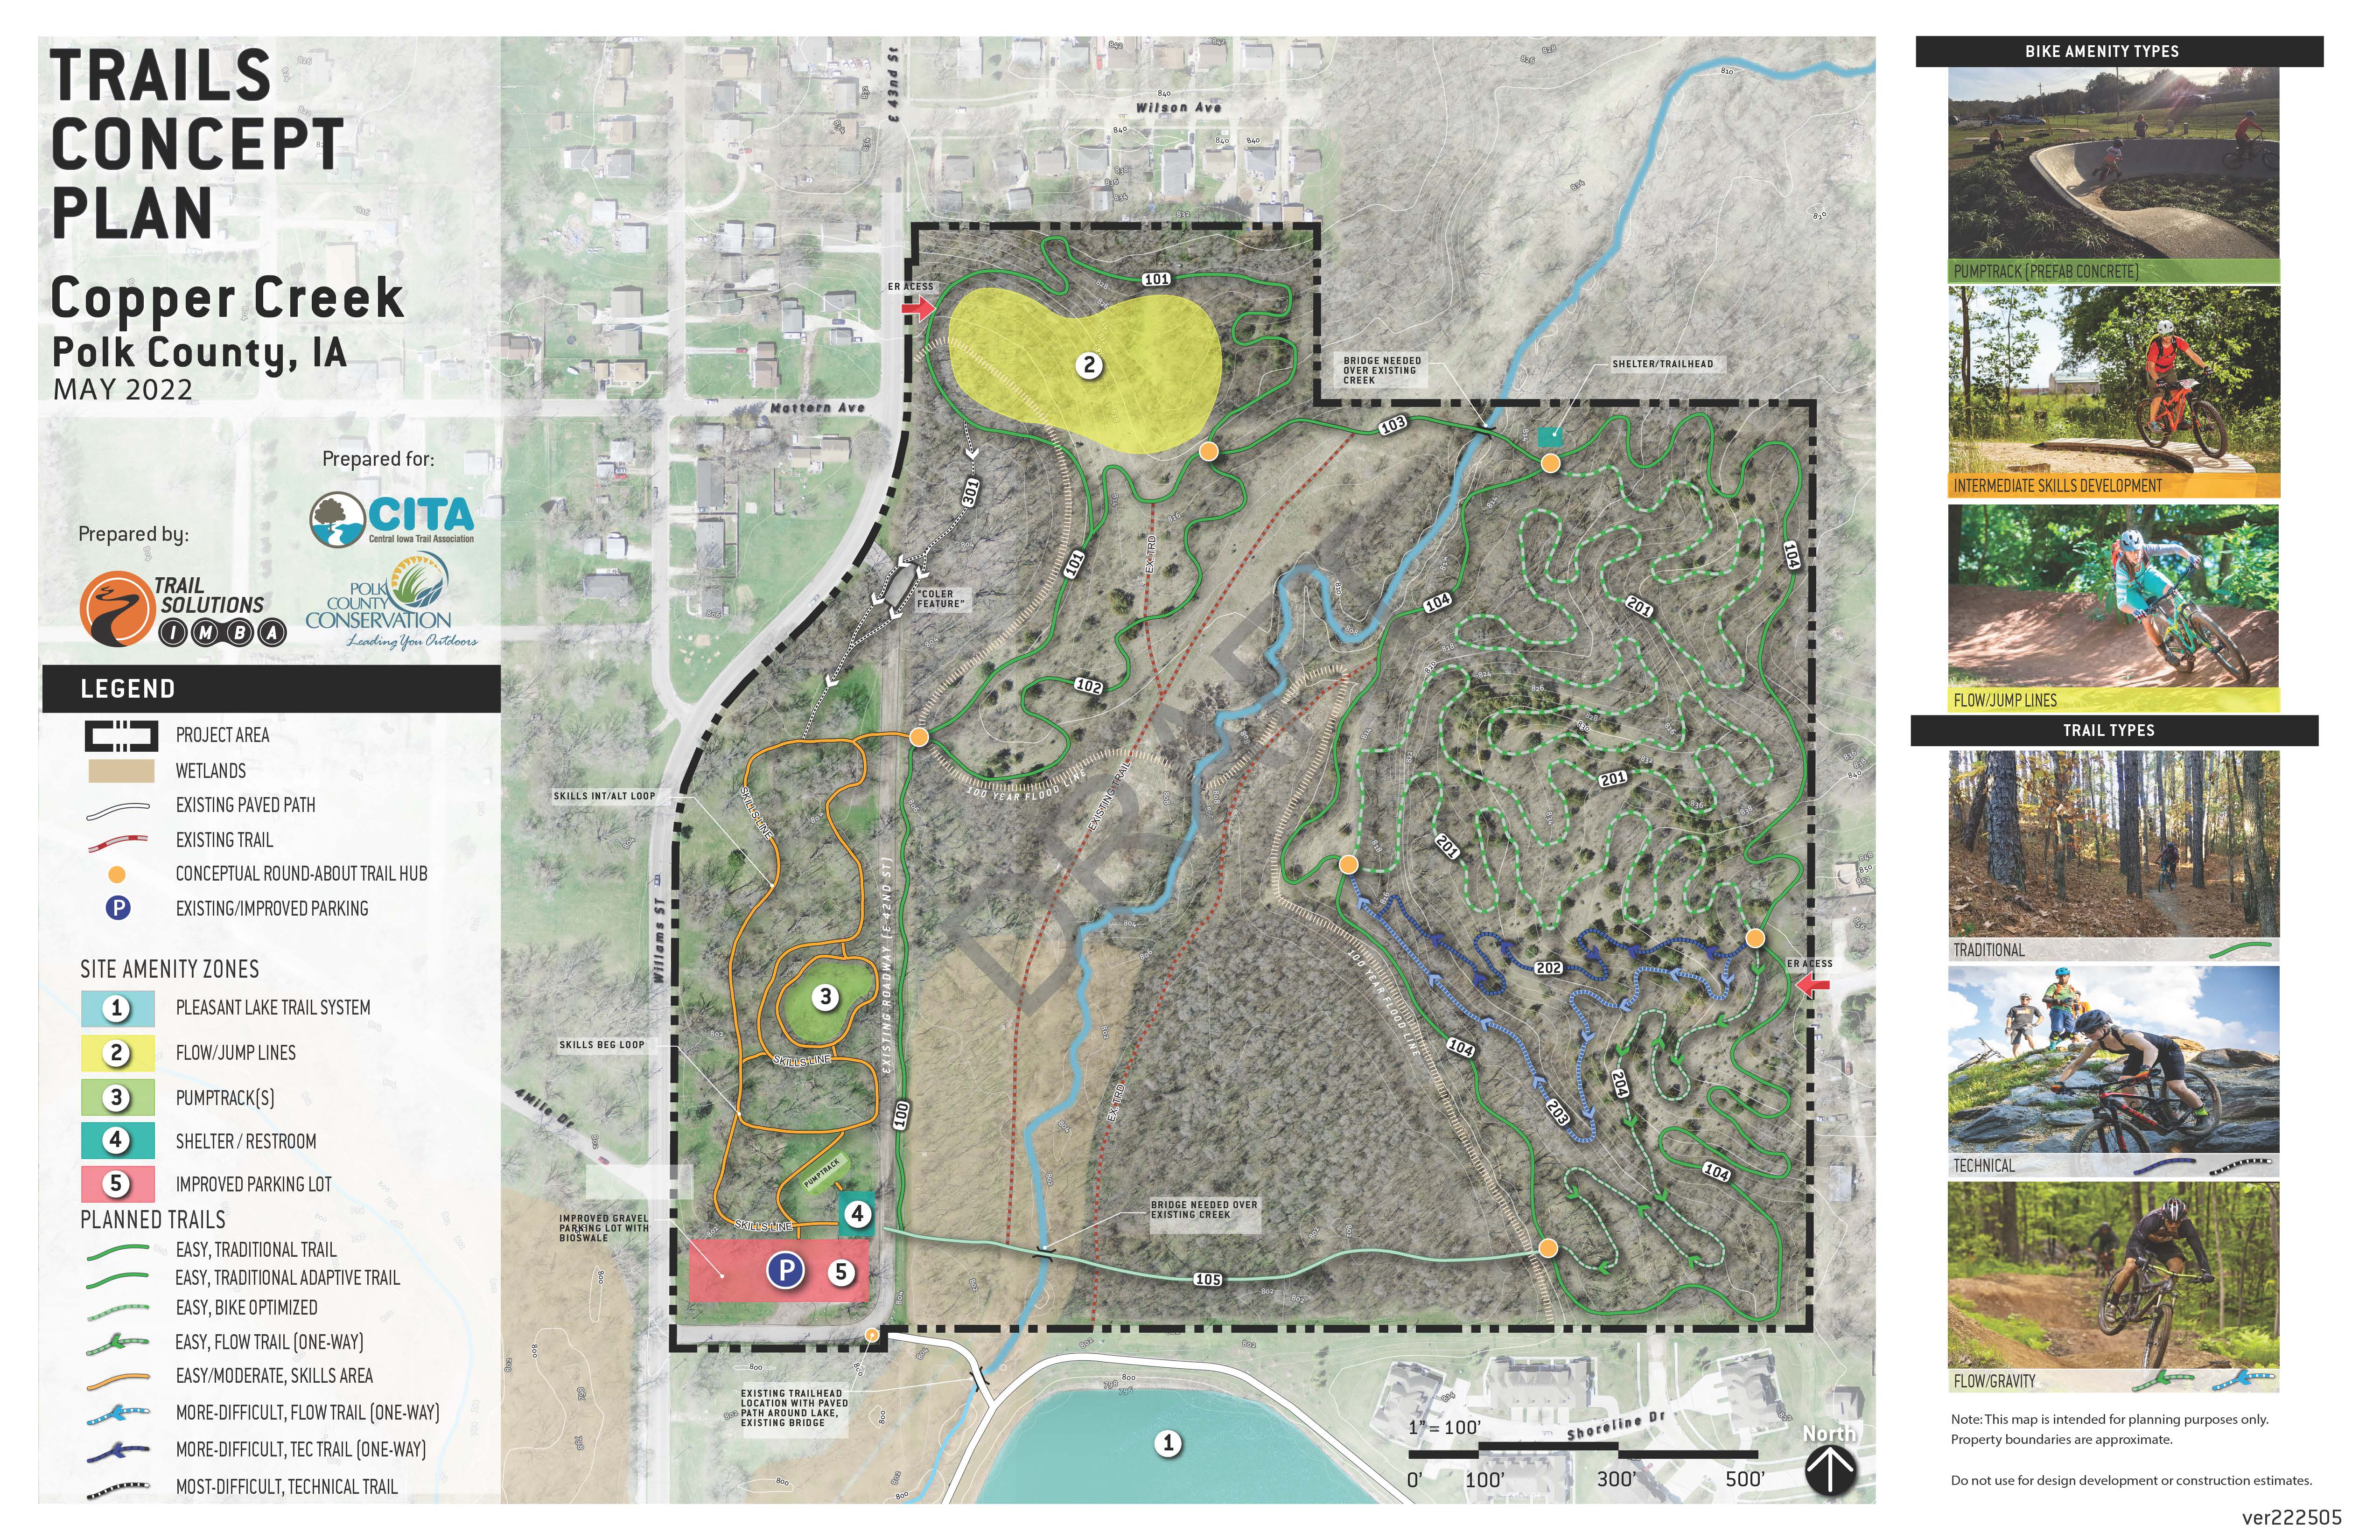 Mountain bike park proposed trail system map and key.